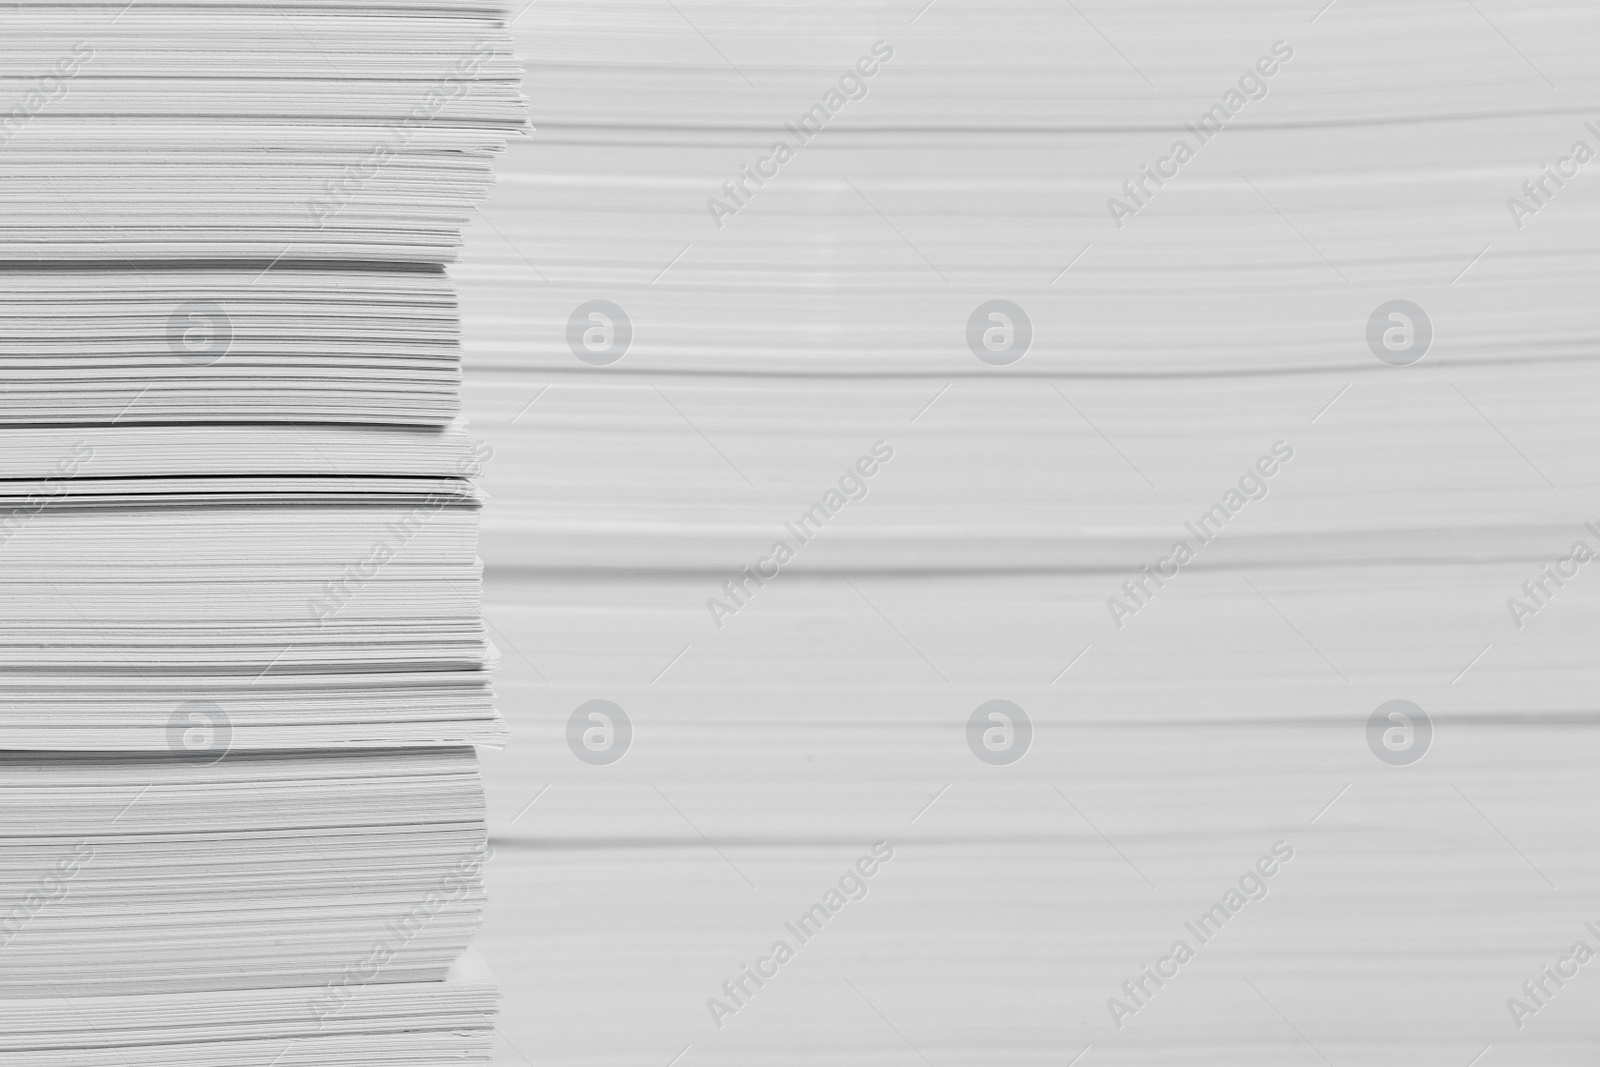 Photo of Stacks of paper sheets as background, closeup